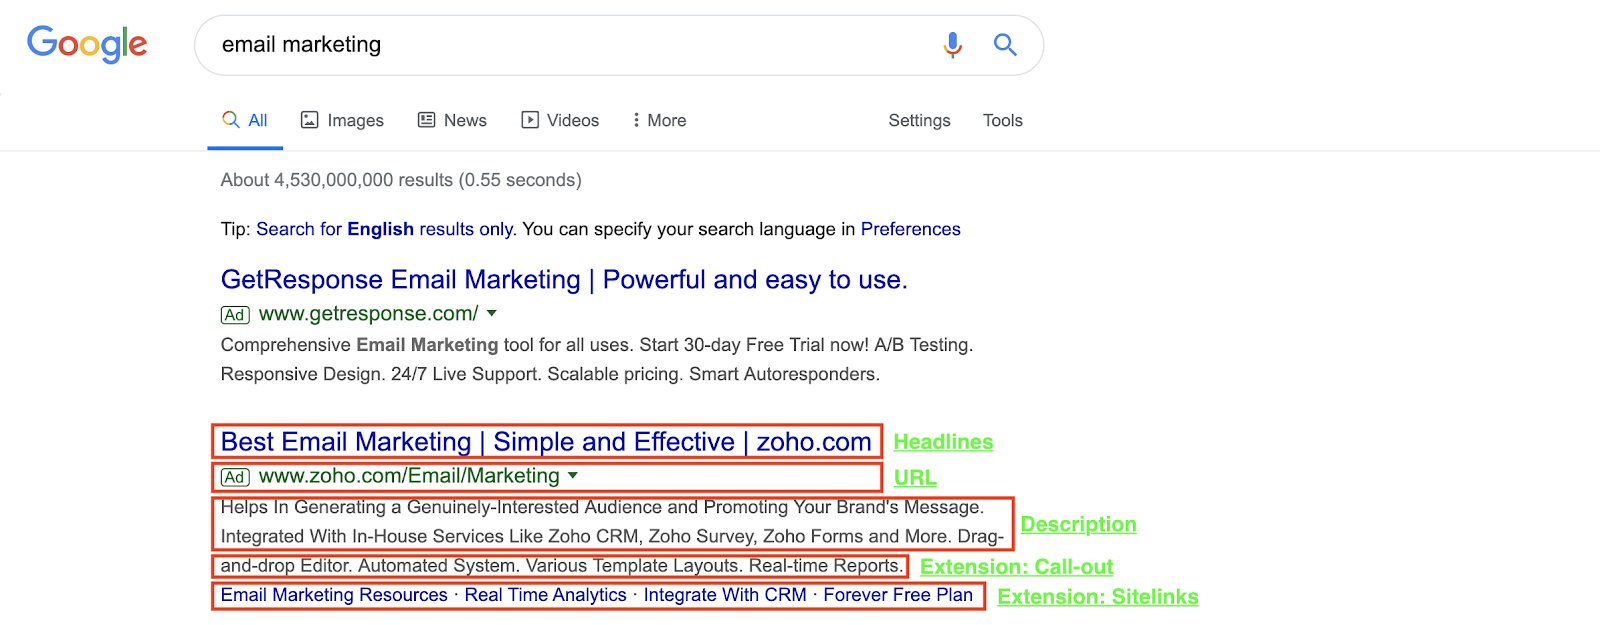 Components of an Google ad copy